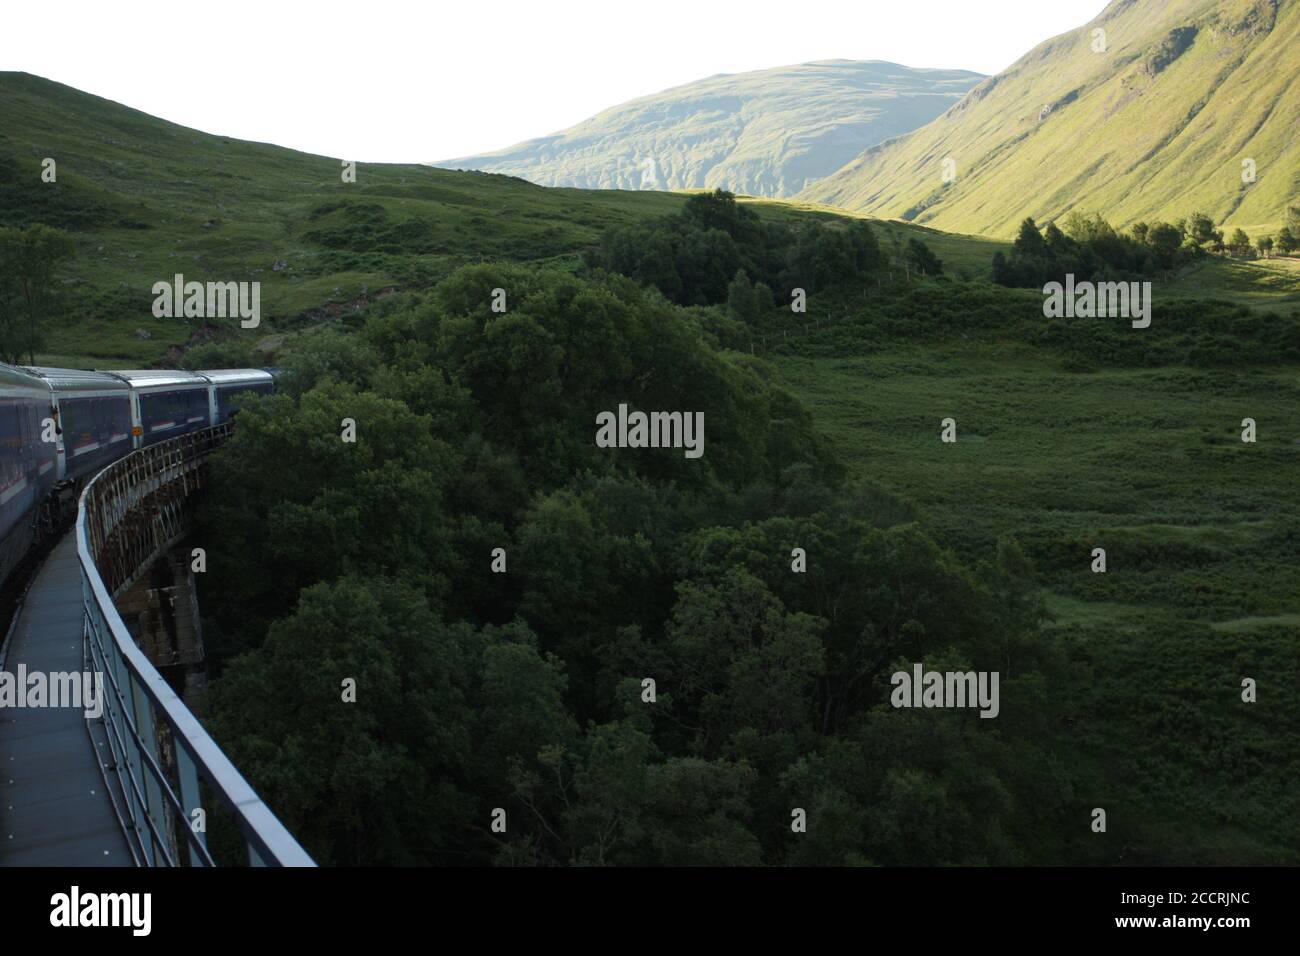 View of the mountains and valley from the overnight sleeper train, London to Fort William, the 'Deerstalker train' Stock Photo